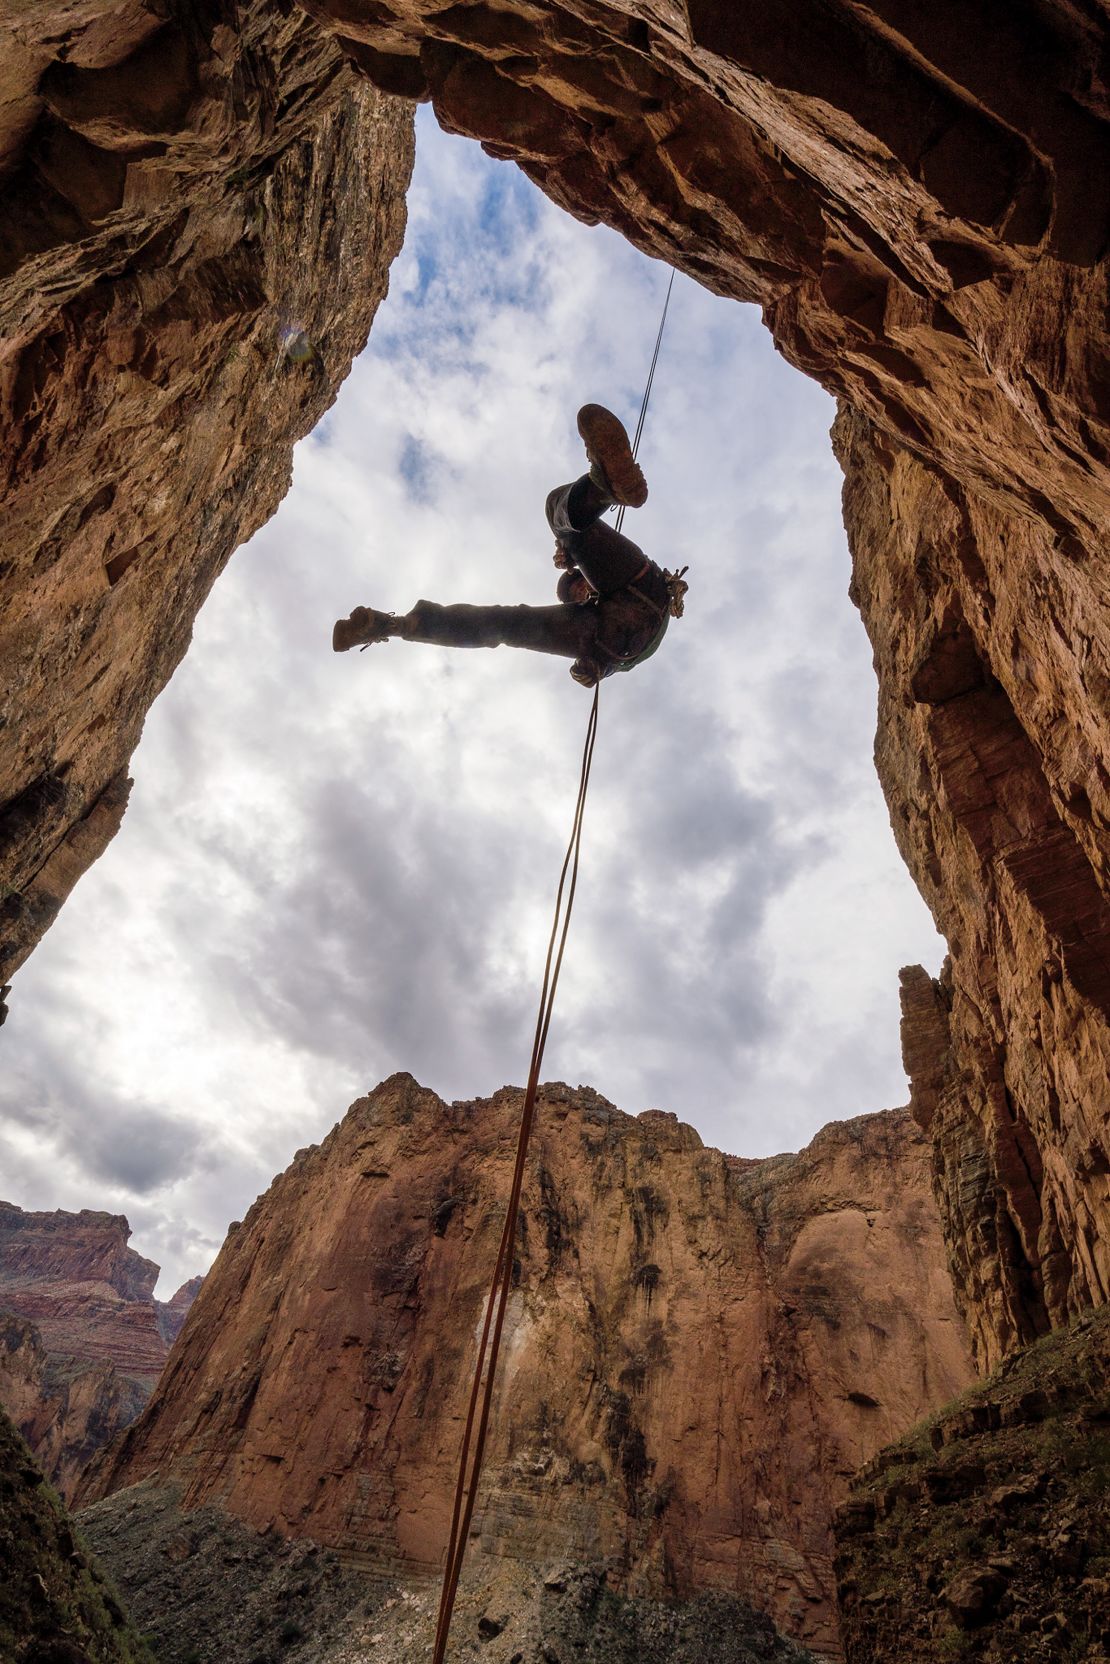 You don't have to rappel your way across the canyon to explore it more deeply. 